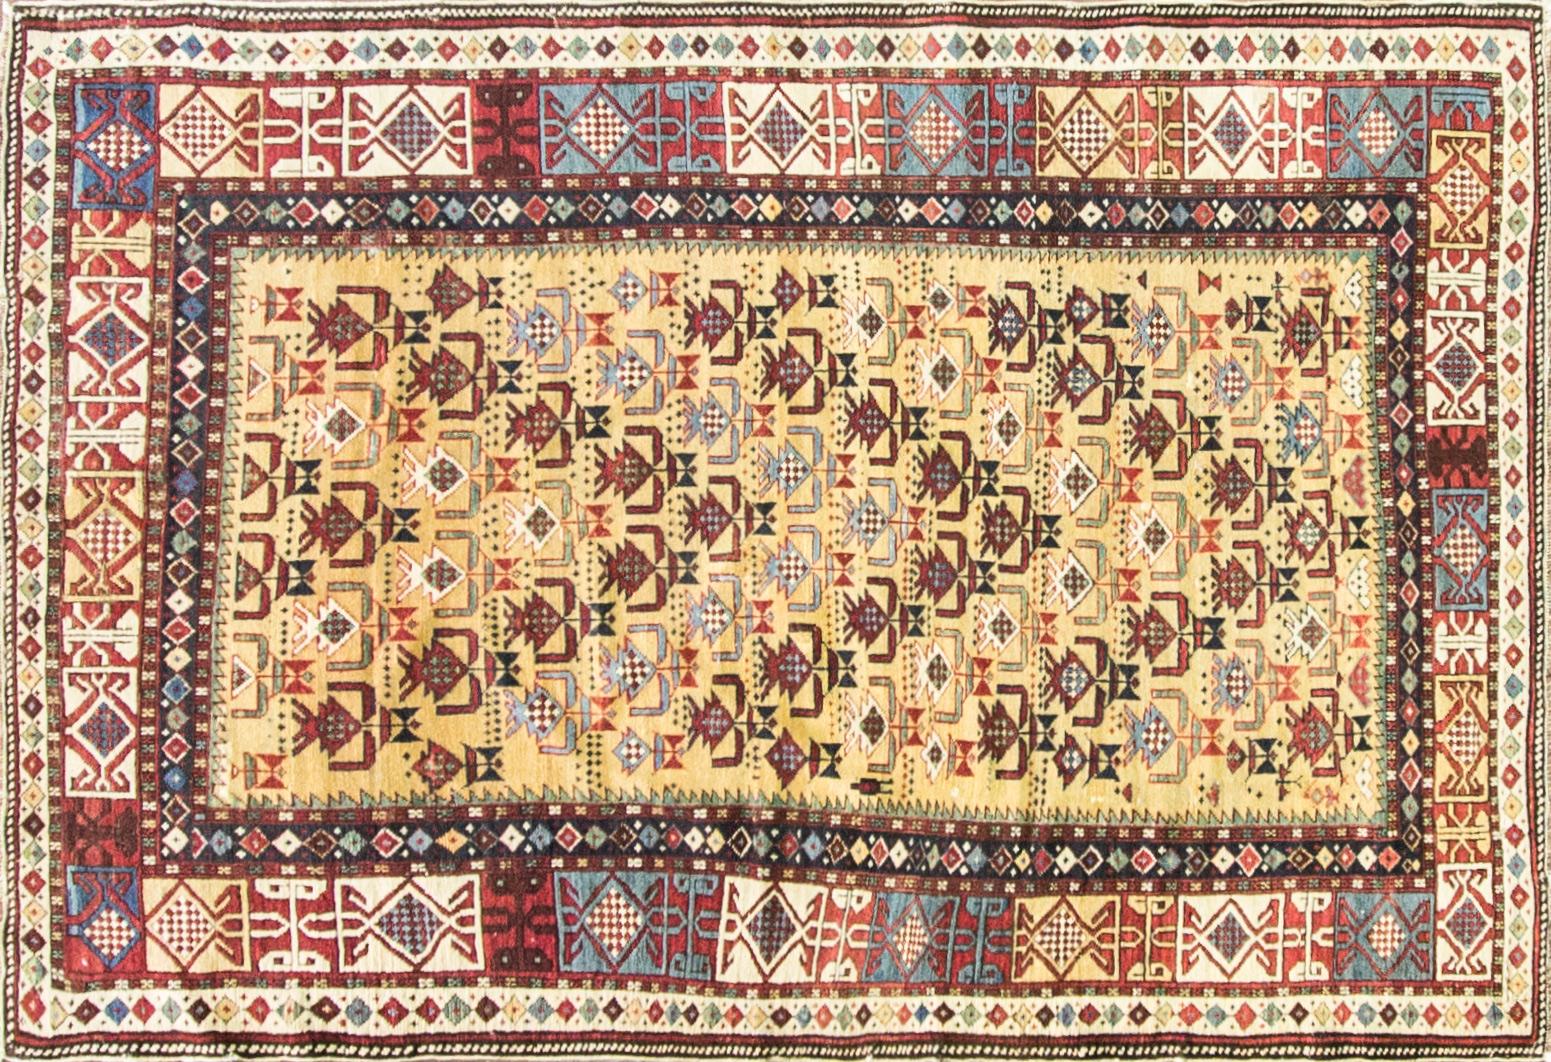 All colors on light gold background Shirvan rug dated, circa 1880s.
The historic Khanate or administrative district of Shirvan produced many highly decorative antique rugs that have a formality and stylistic complexity that is found in few rugs